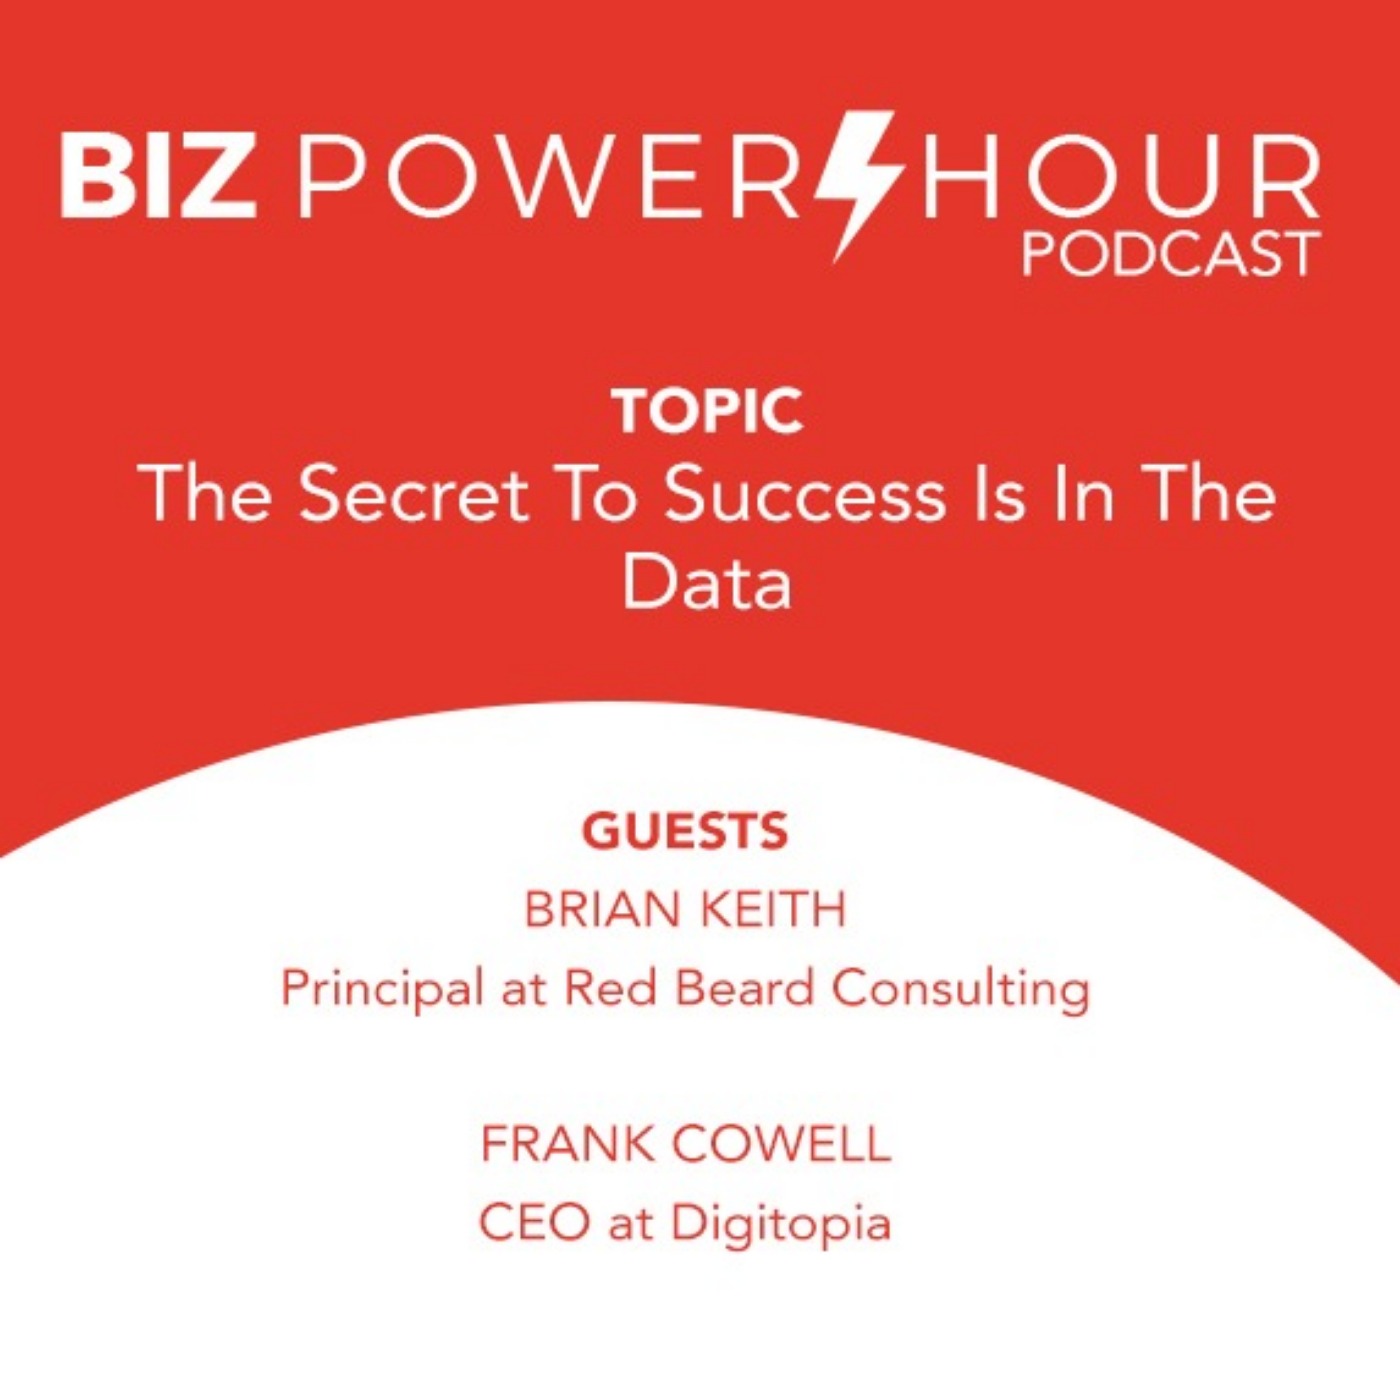 EP3 - The Secret To Success Is In The Data